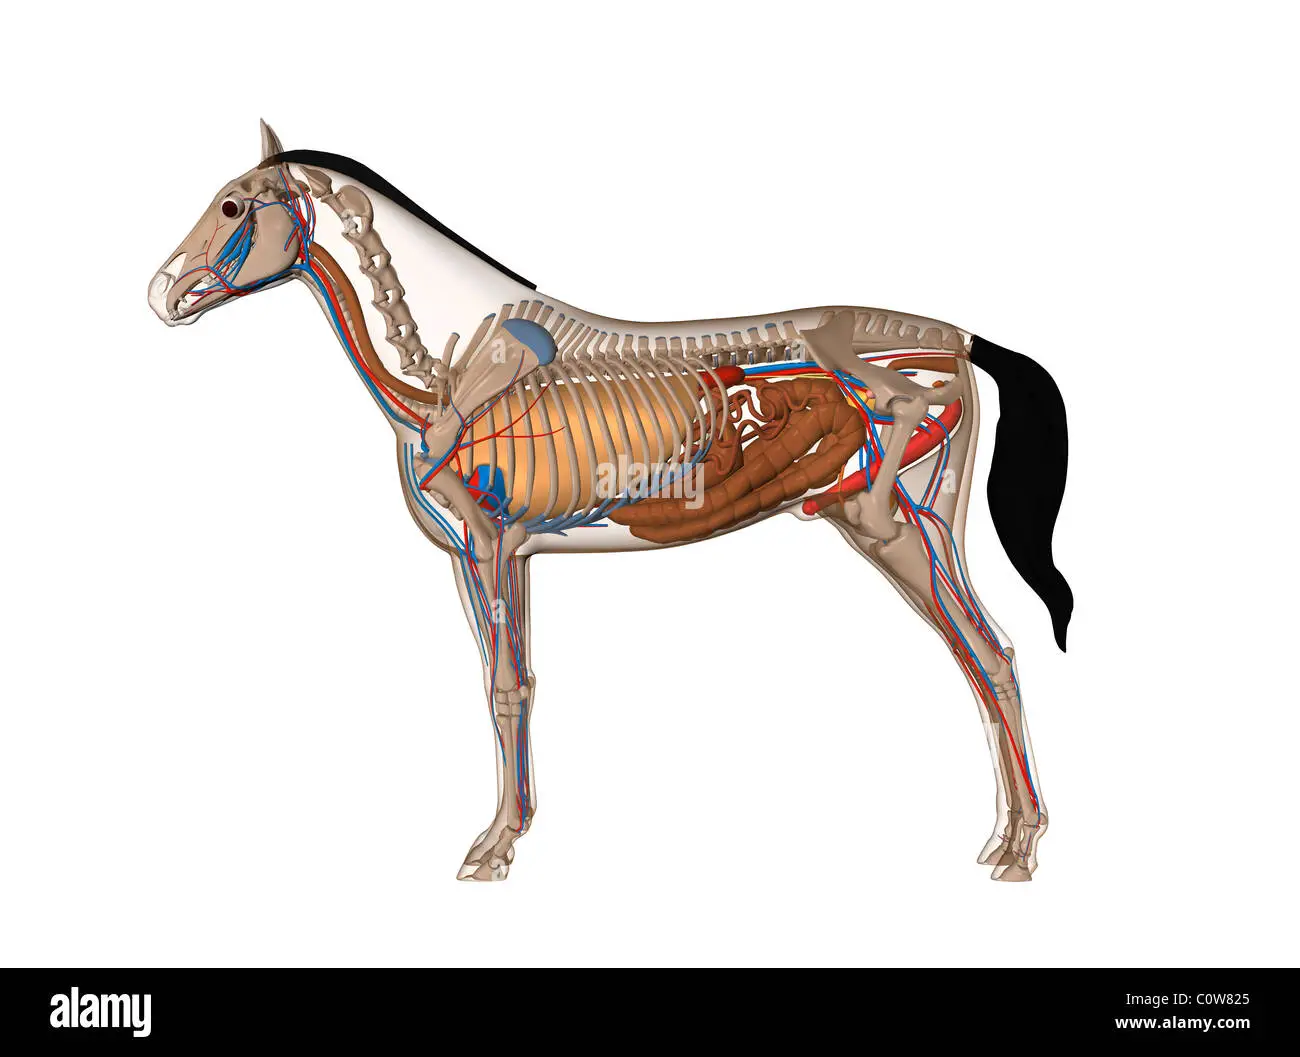 Anatomy Of A Horse Penis